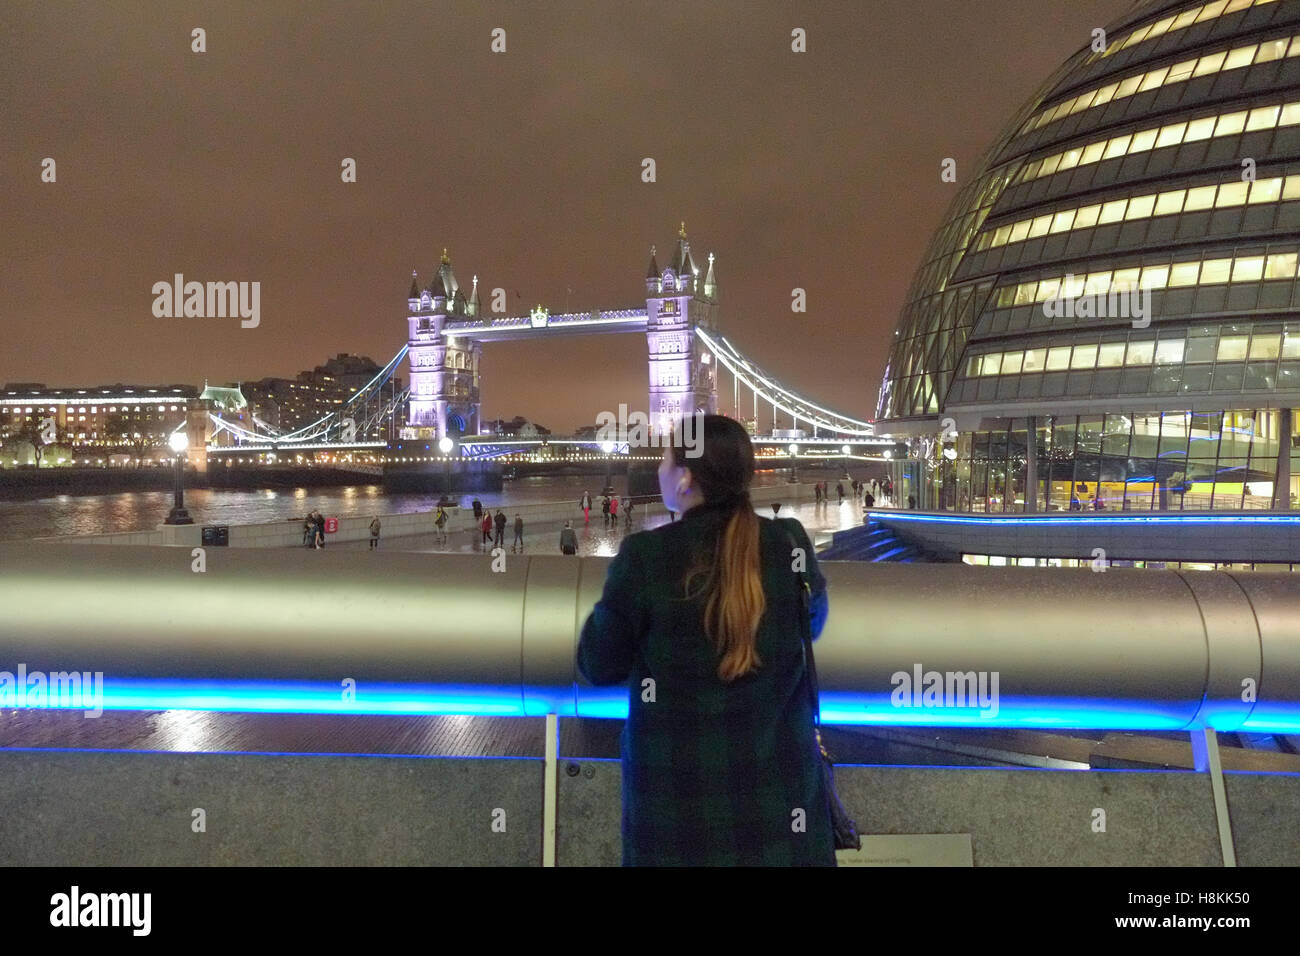 London, UK. 14th November 2016. Very cloudy and overcast evening beside the River Thames, London. claire doherty/Alamy Live News Stock Photo